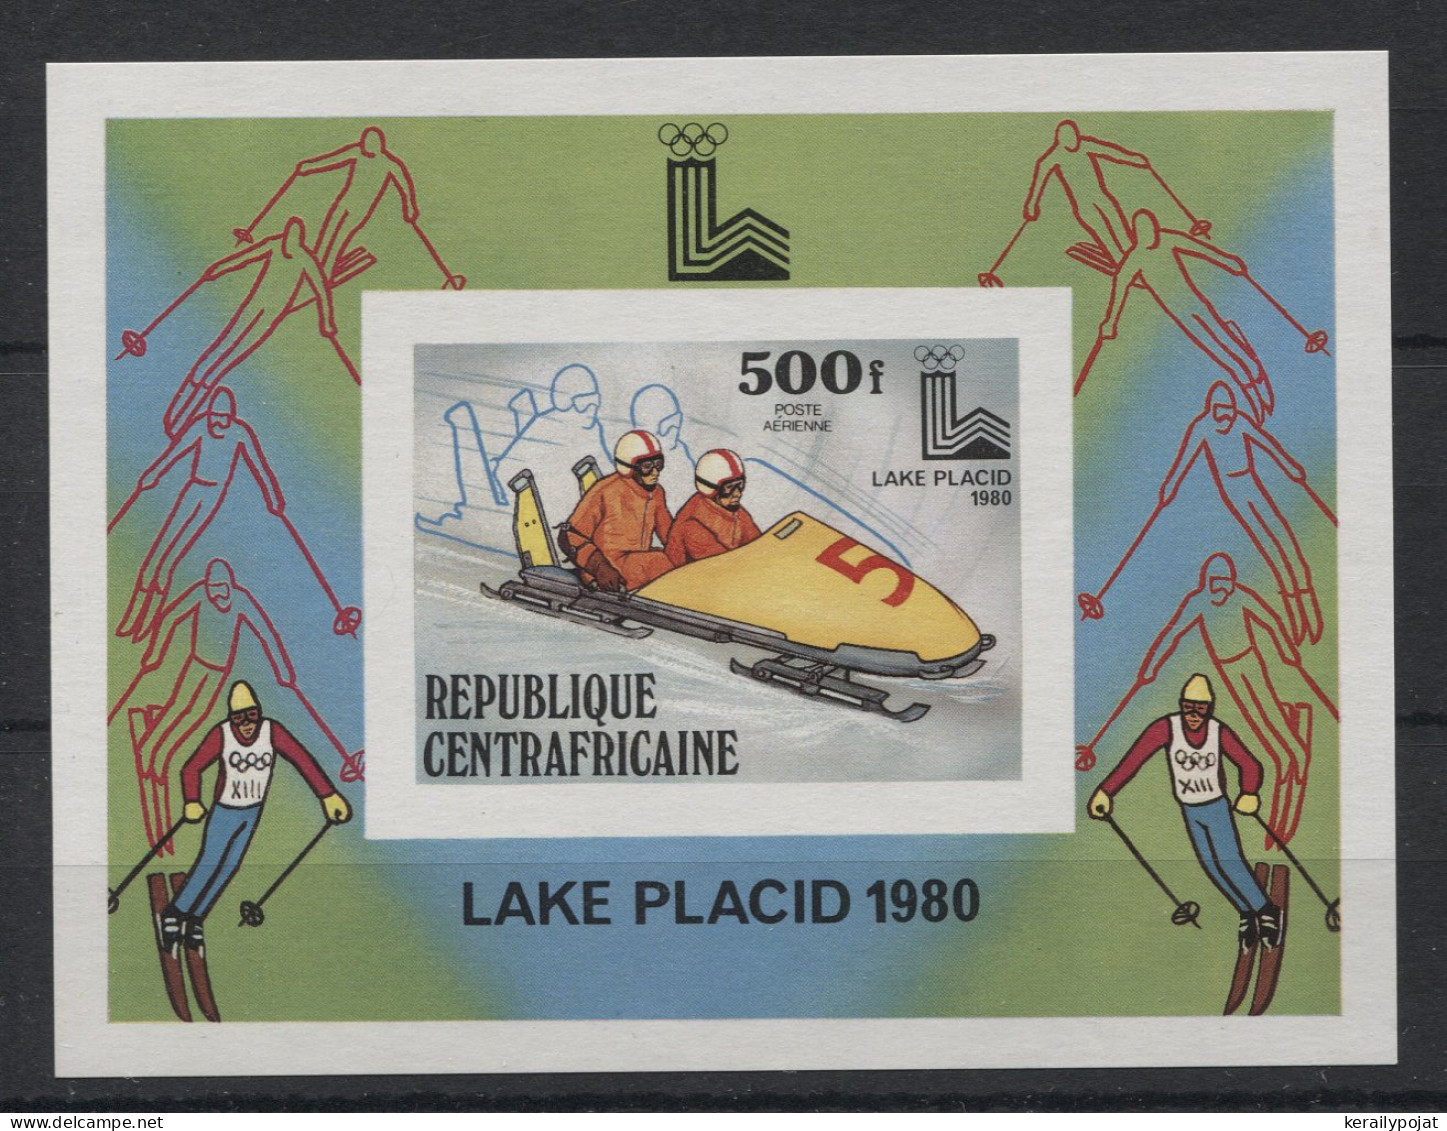 Central African Republic - 1979 Winter Olympics Lake Placid Block IMPERFORATE MNH__(TH-23725) - Central African Republic